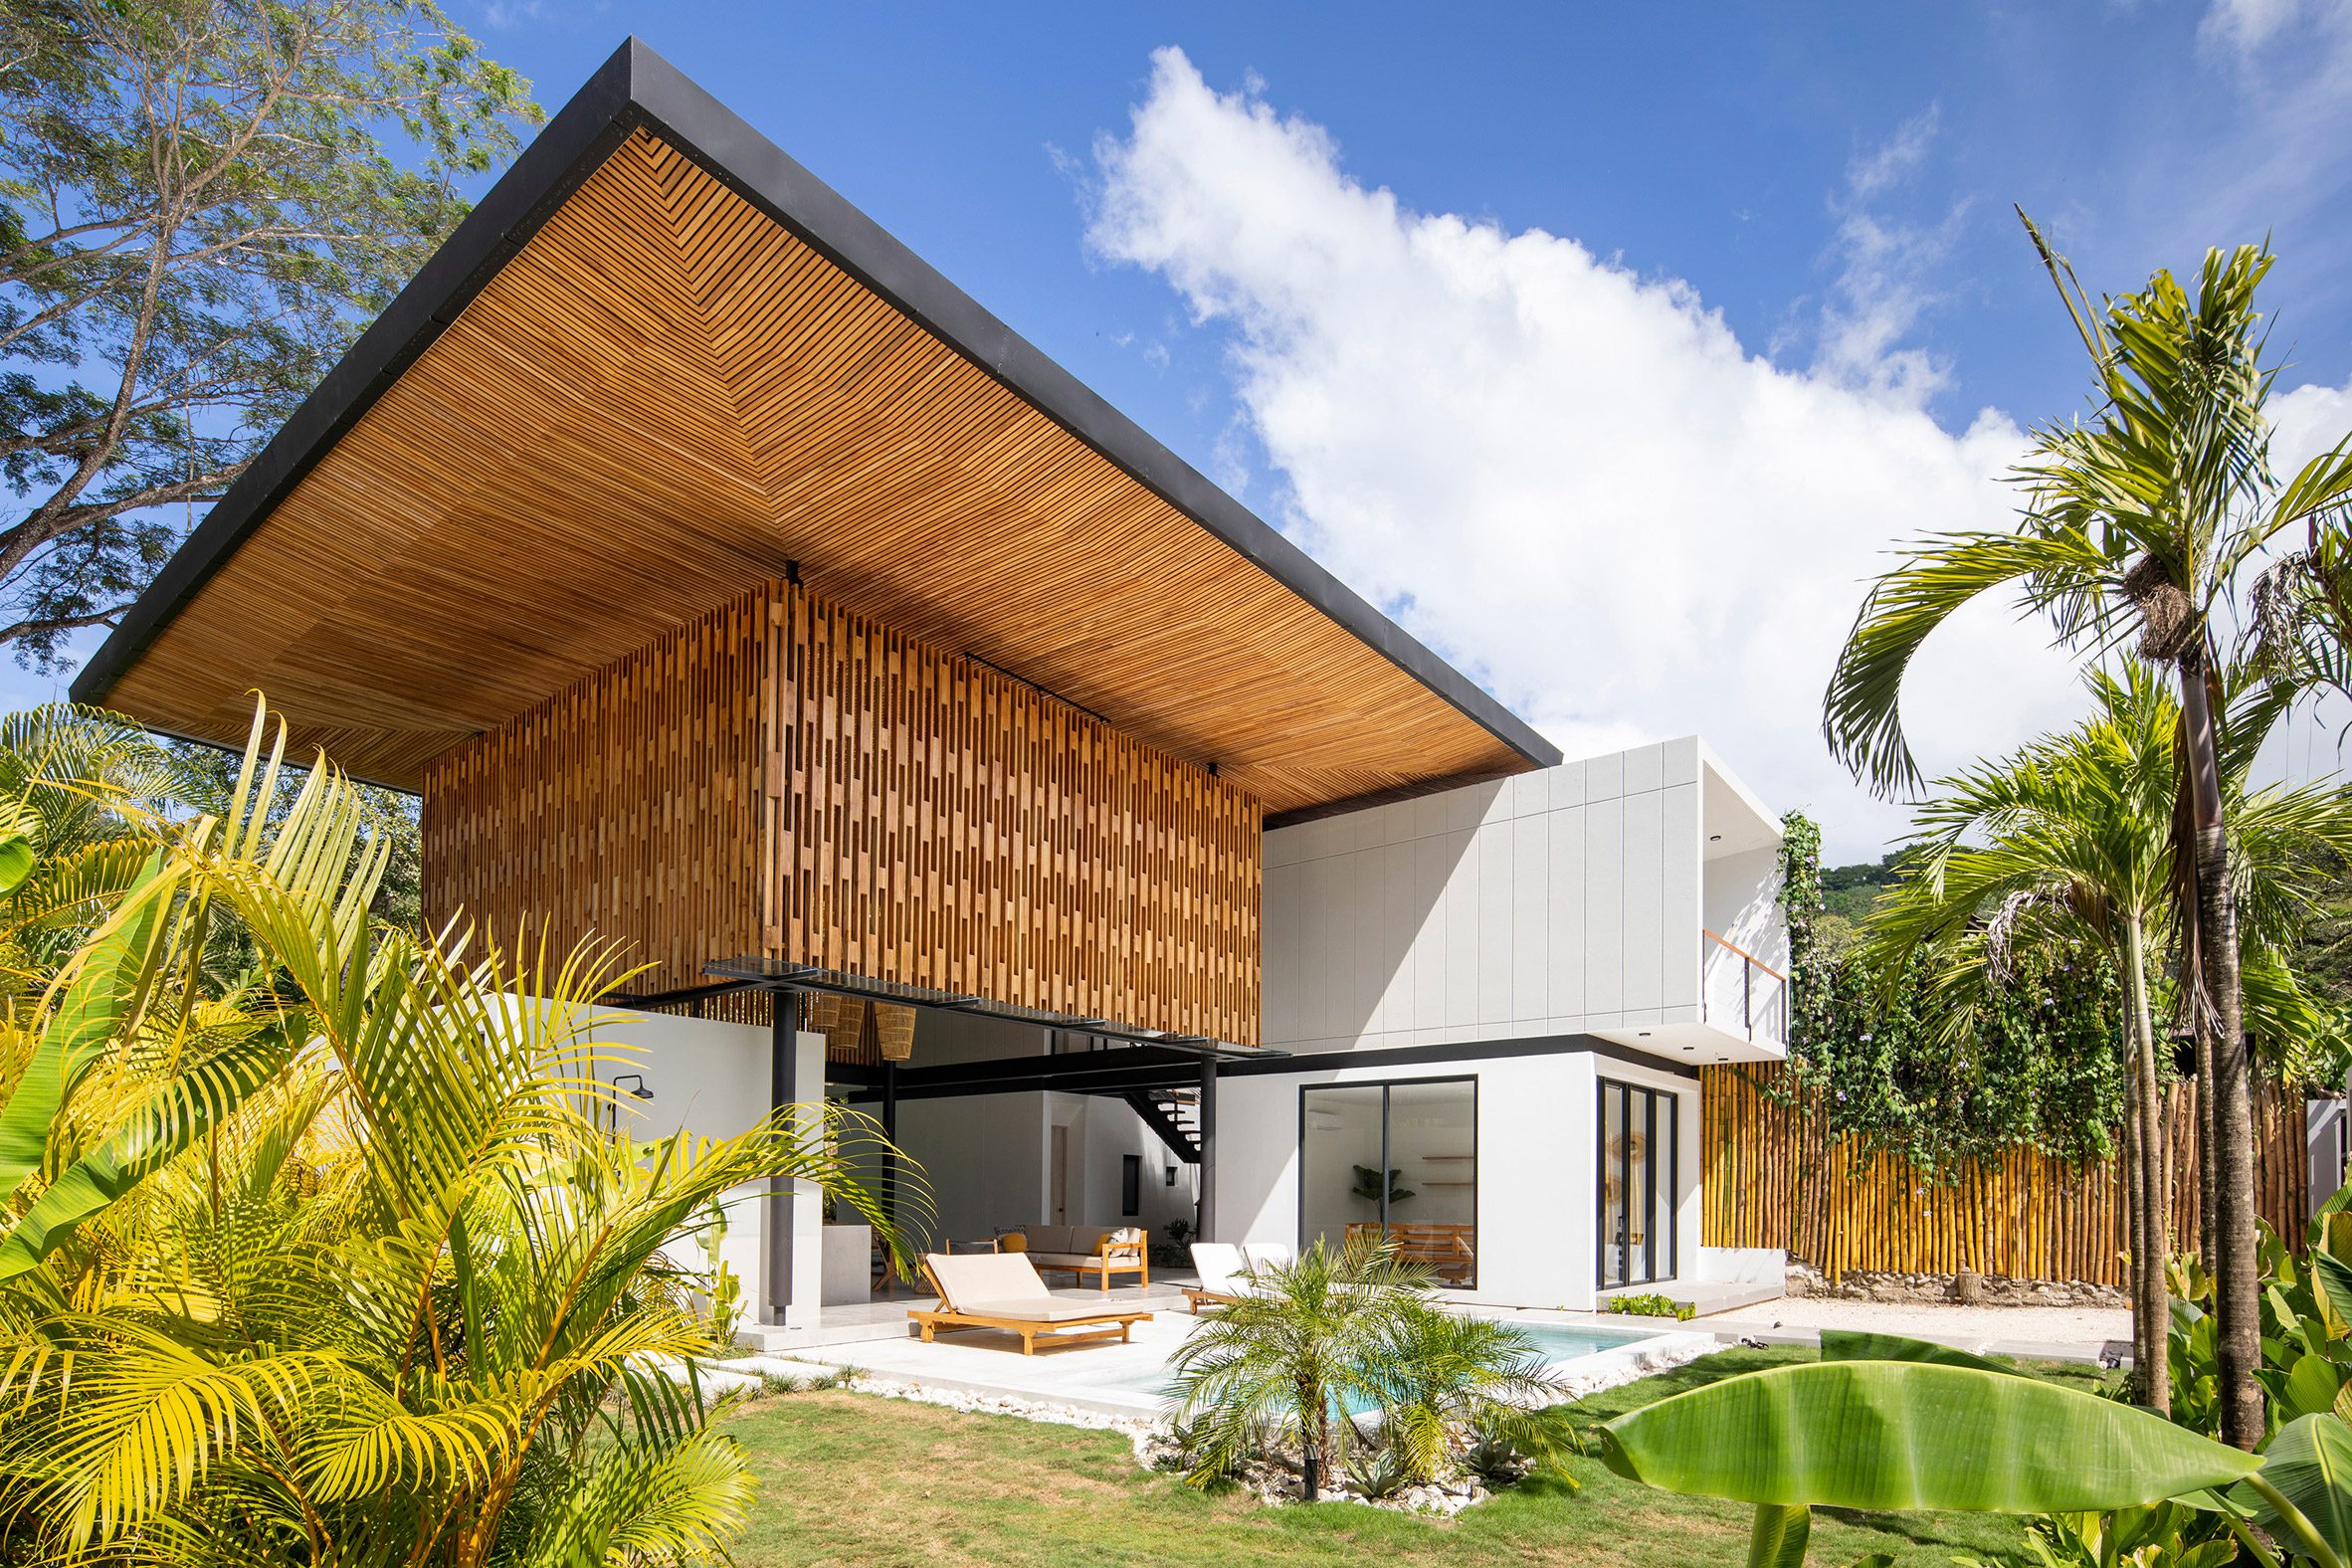 Naia I house in Costa Rica with a roof made of wooden screens